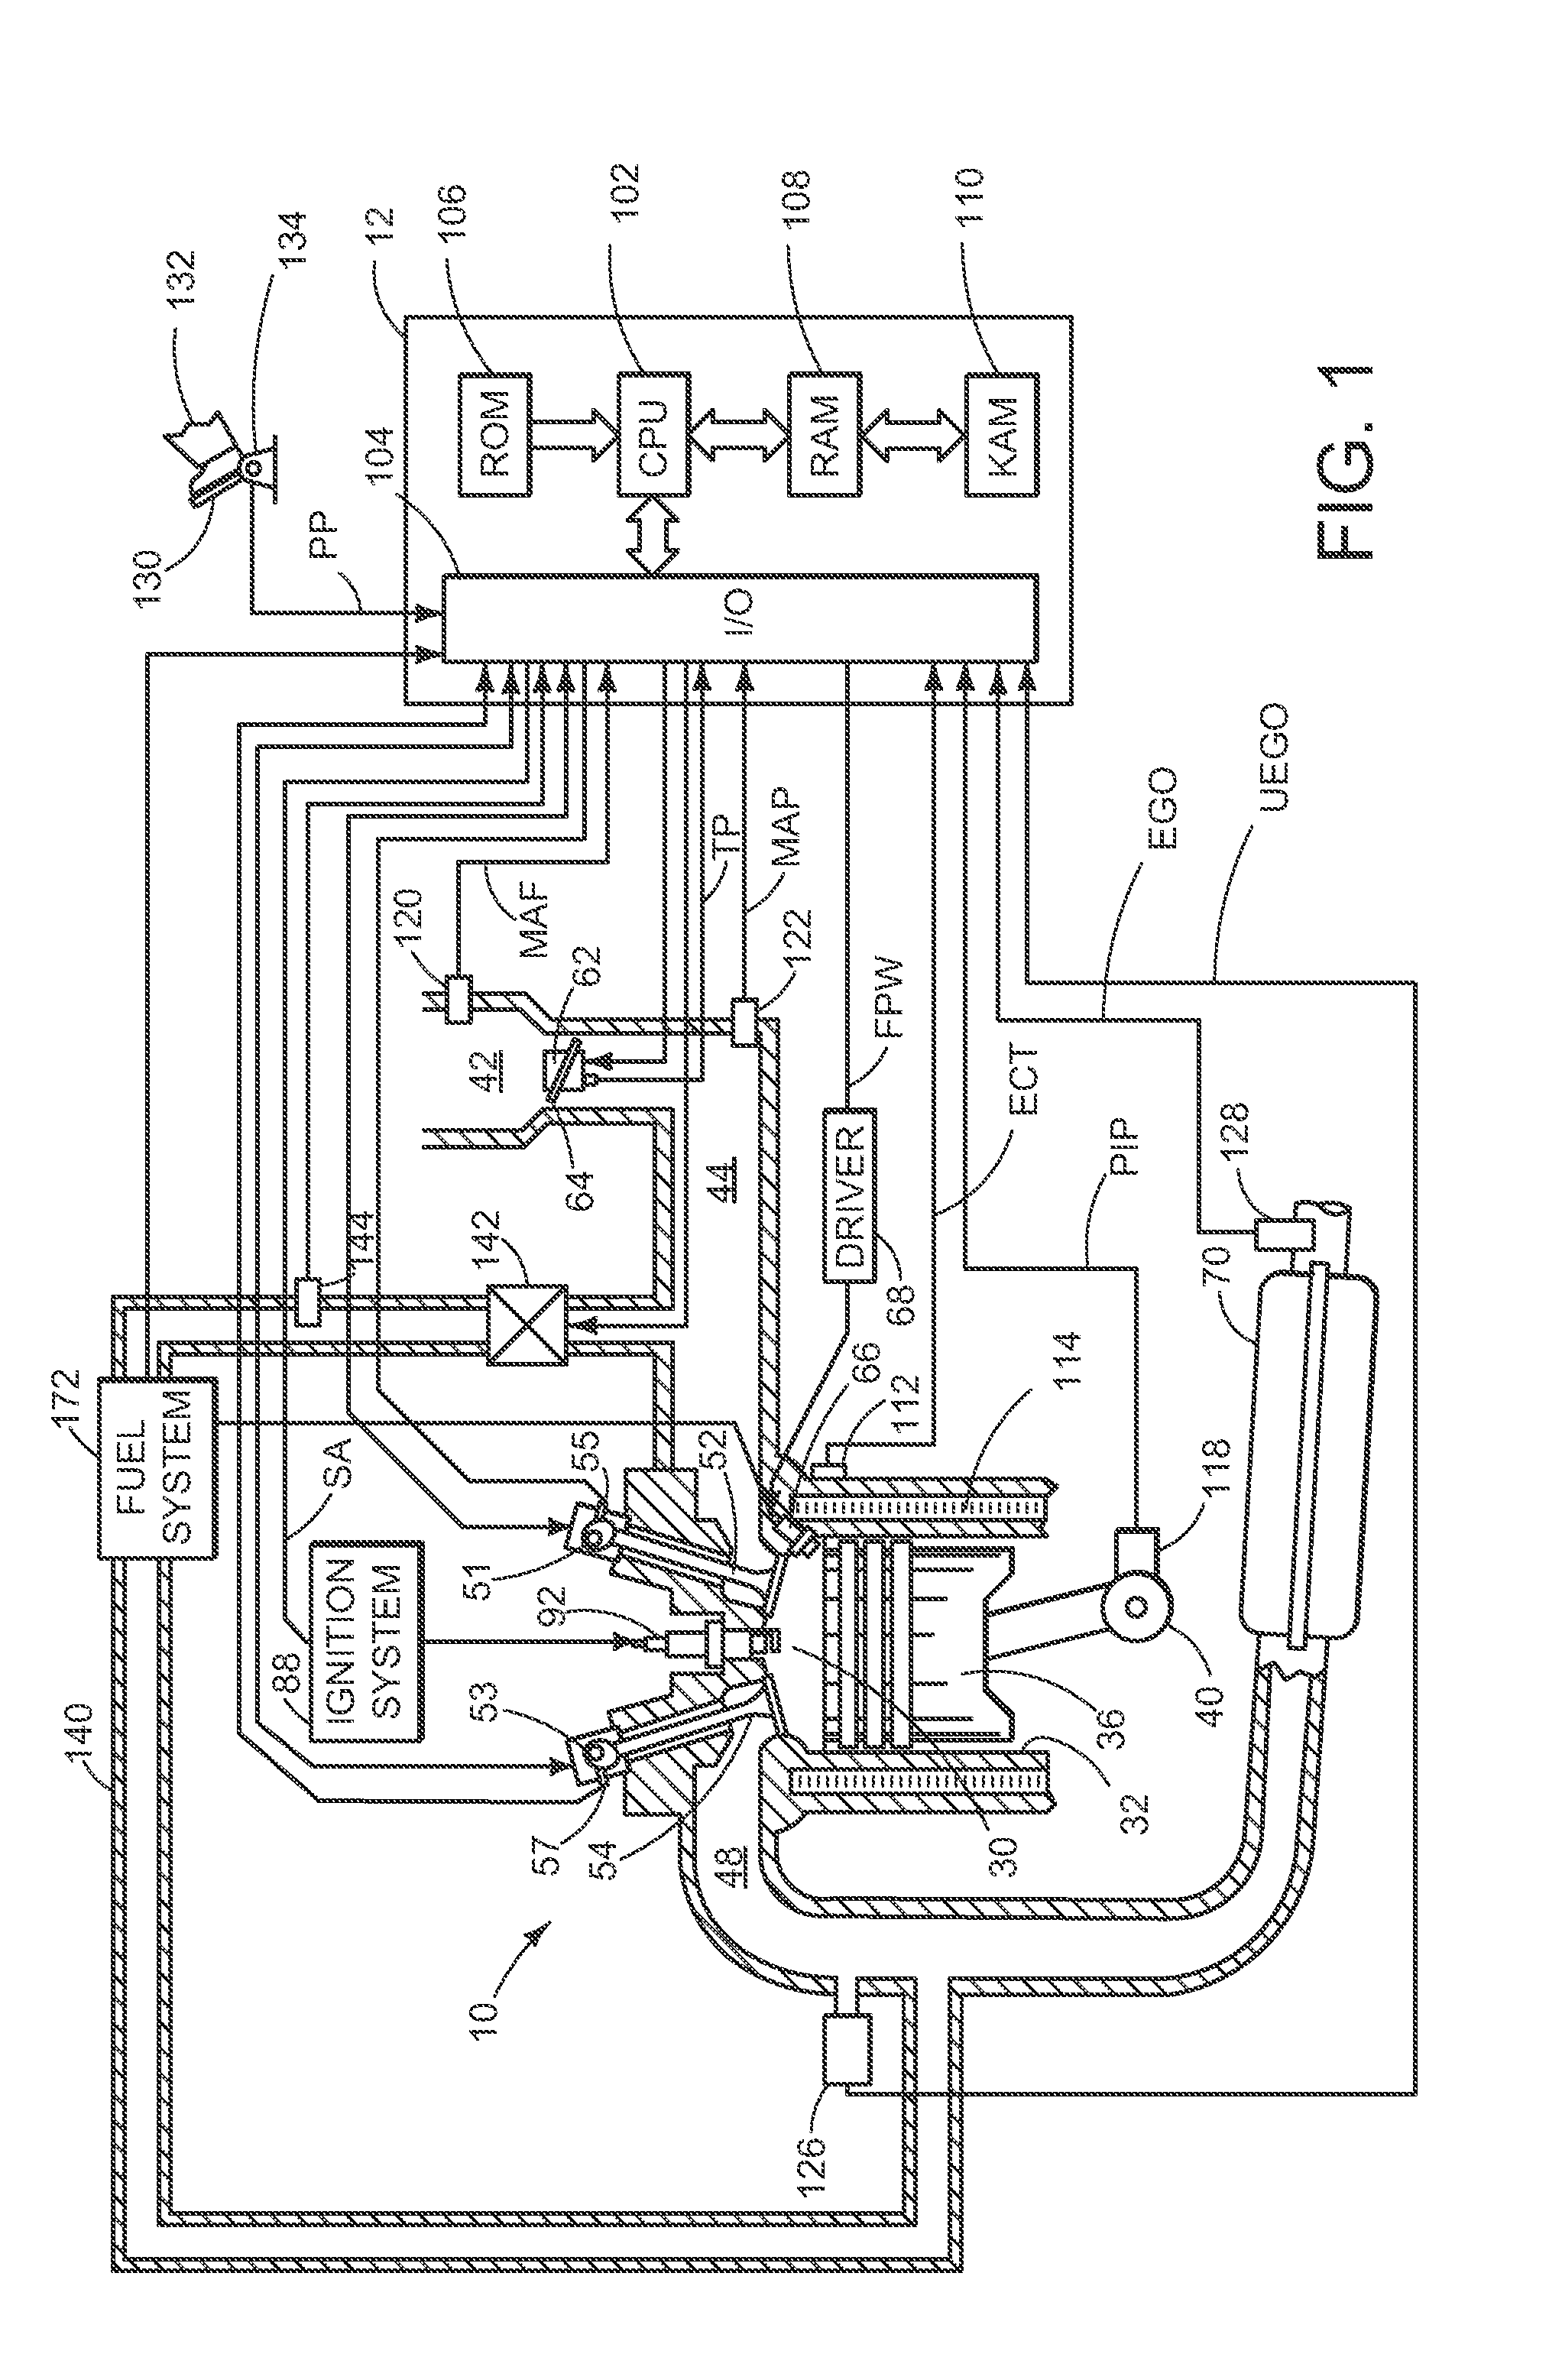 System and methods for controlling air fuel ratio